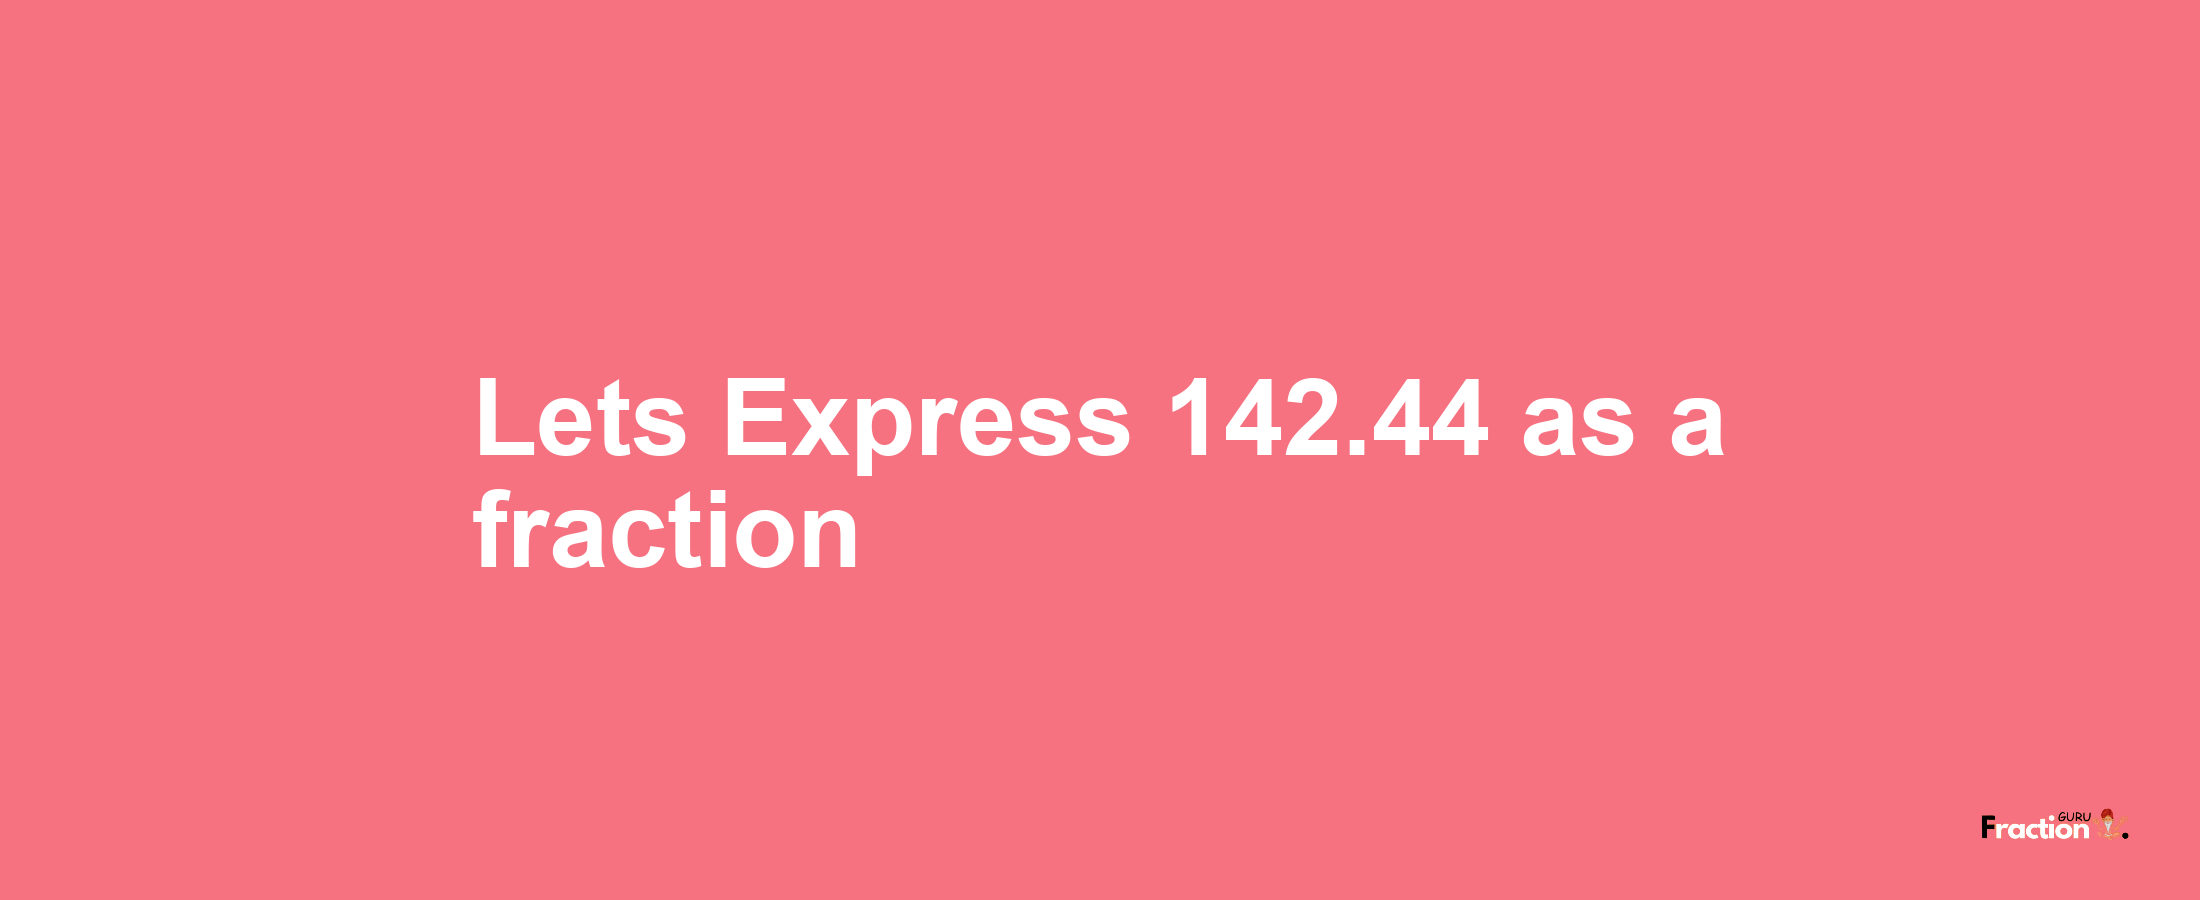 Lets Express 142.44 as afraction